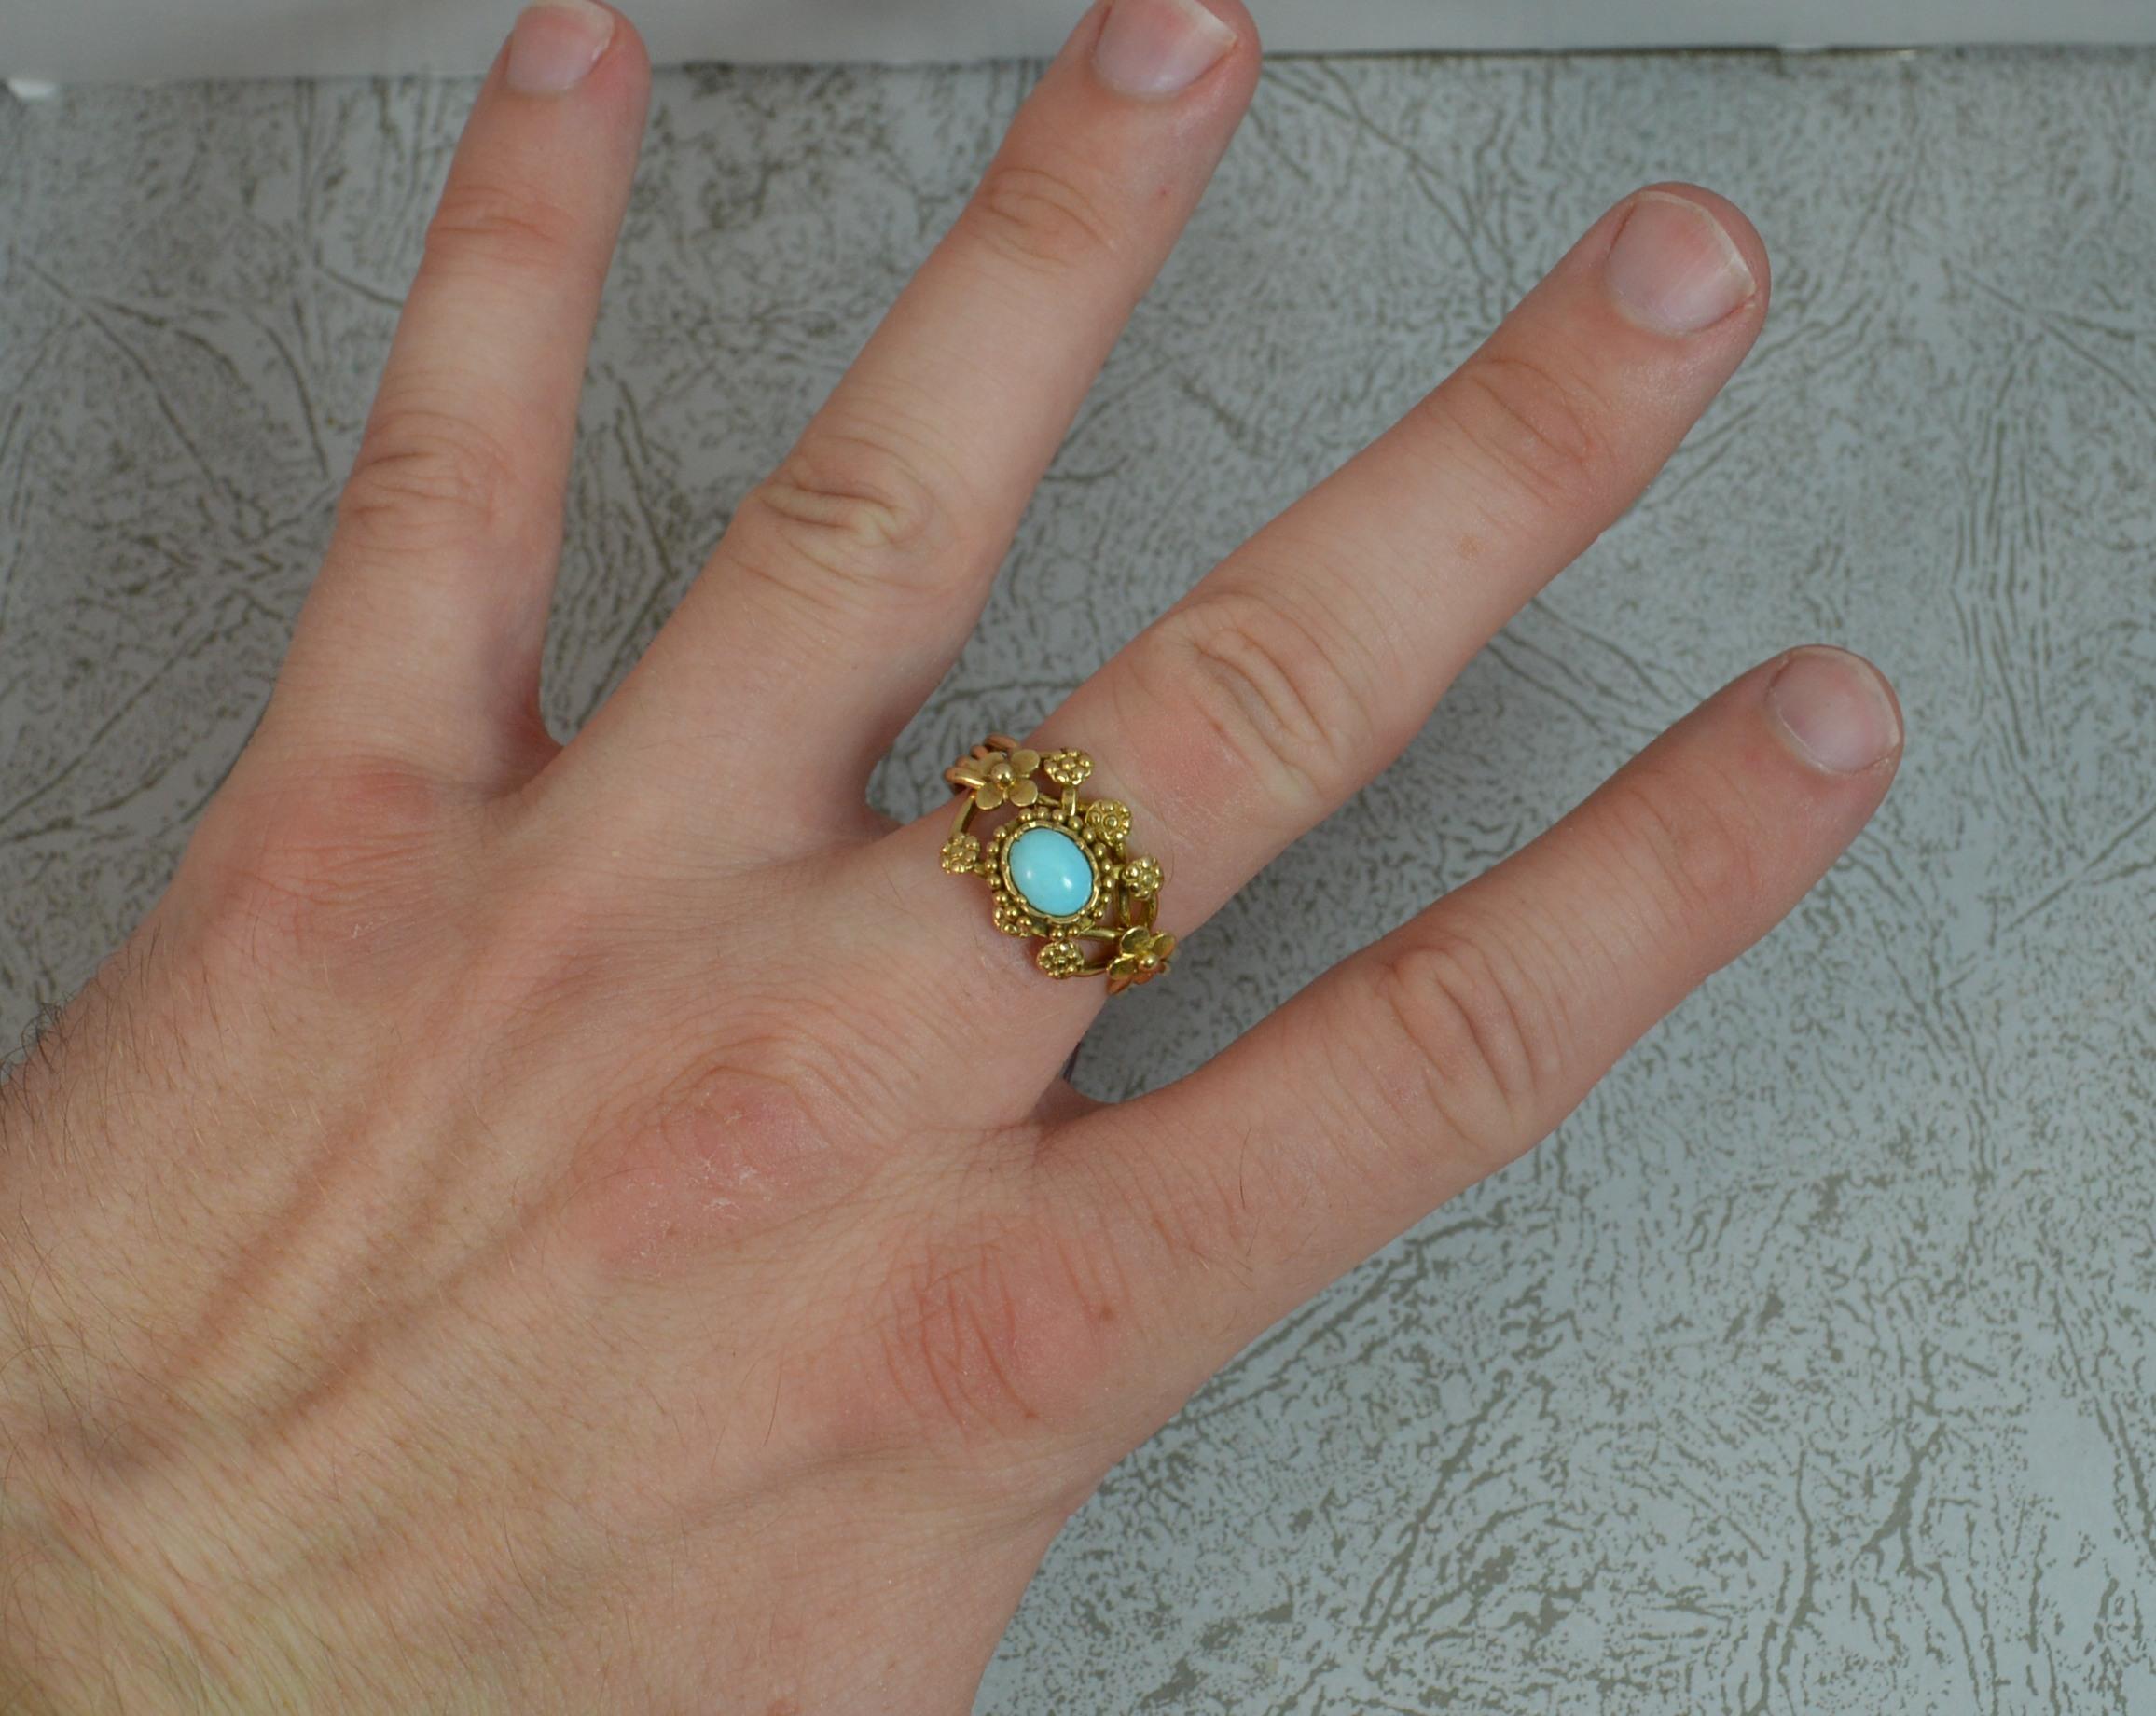 A superb true Victorian period four banded puzzle ring.
Solid 18 carat yellow gold example.
Designed with an oval turquoise to centre with floral gold flower heads surrounding.
Up to 13mm wide band to front.

CONDITION ; Very good for age. Clean and